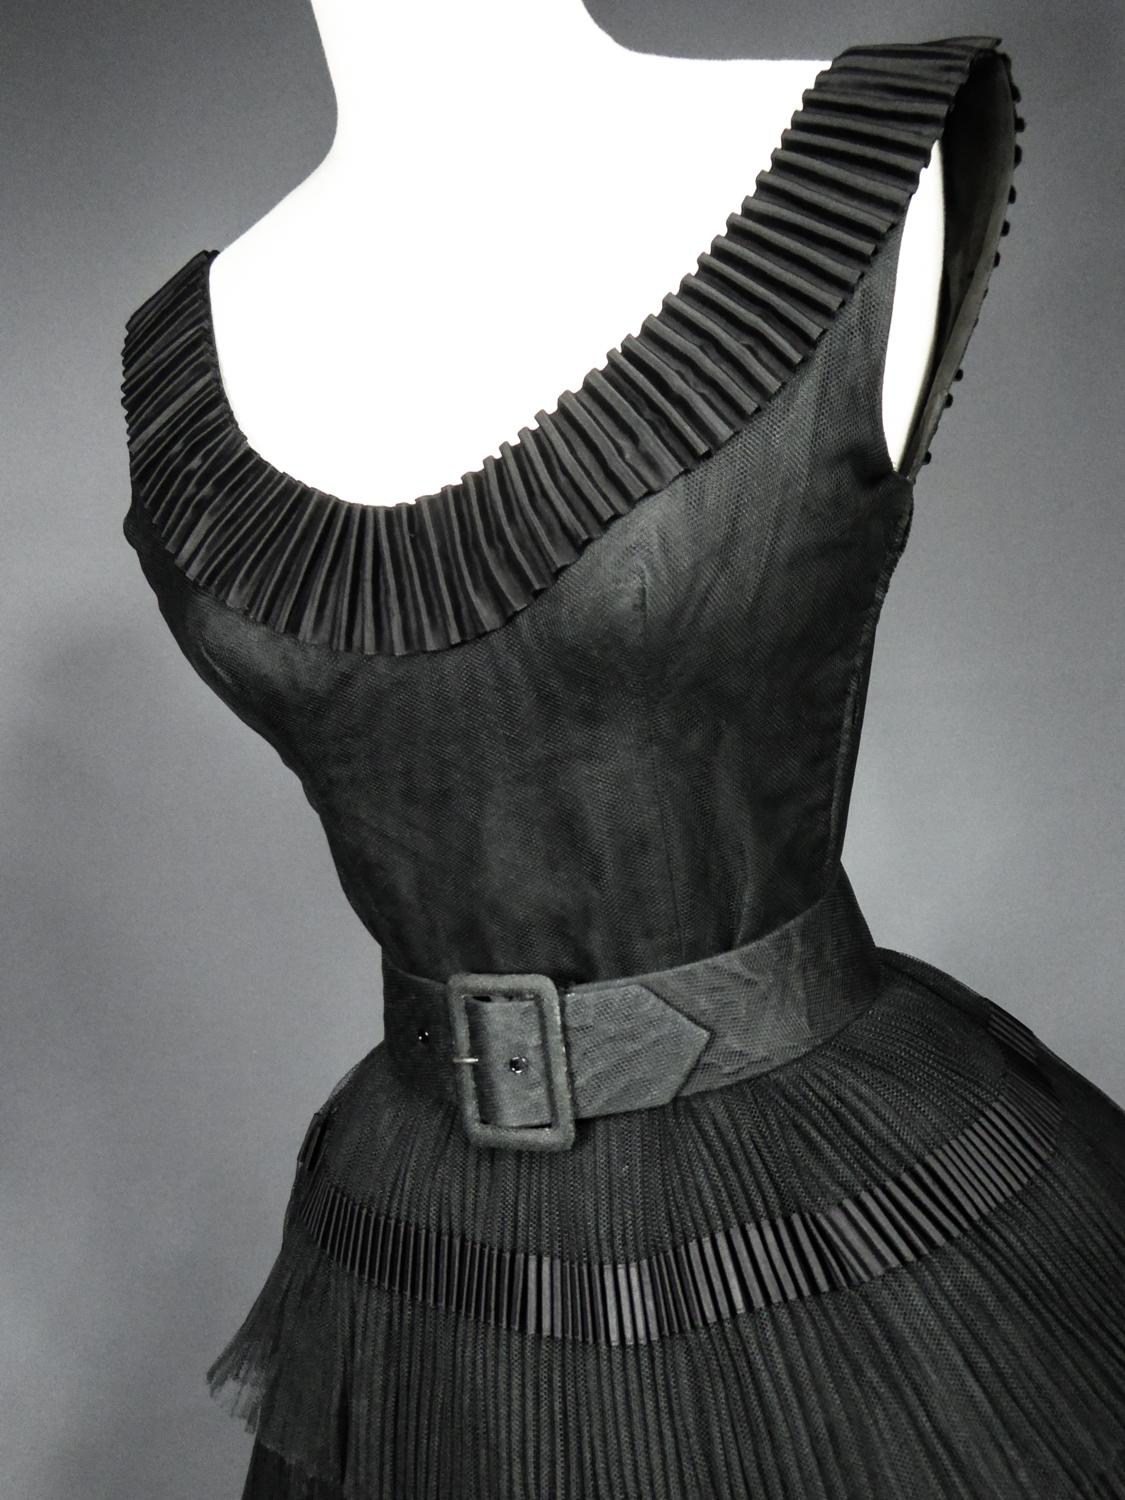 Circa 1958/1962
France

Astonishing Little Cocktail Black Dress composed of 3 pieces : bodice, skirt and belt by Nina Ricci Haute Couture dating from the end of the 1950s. Sleeveless bodice with large cleavage in black taffeta covered with black